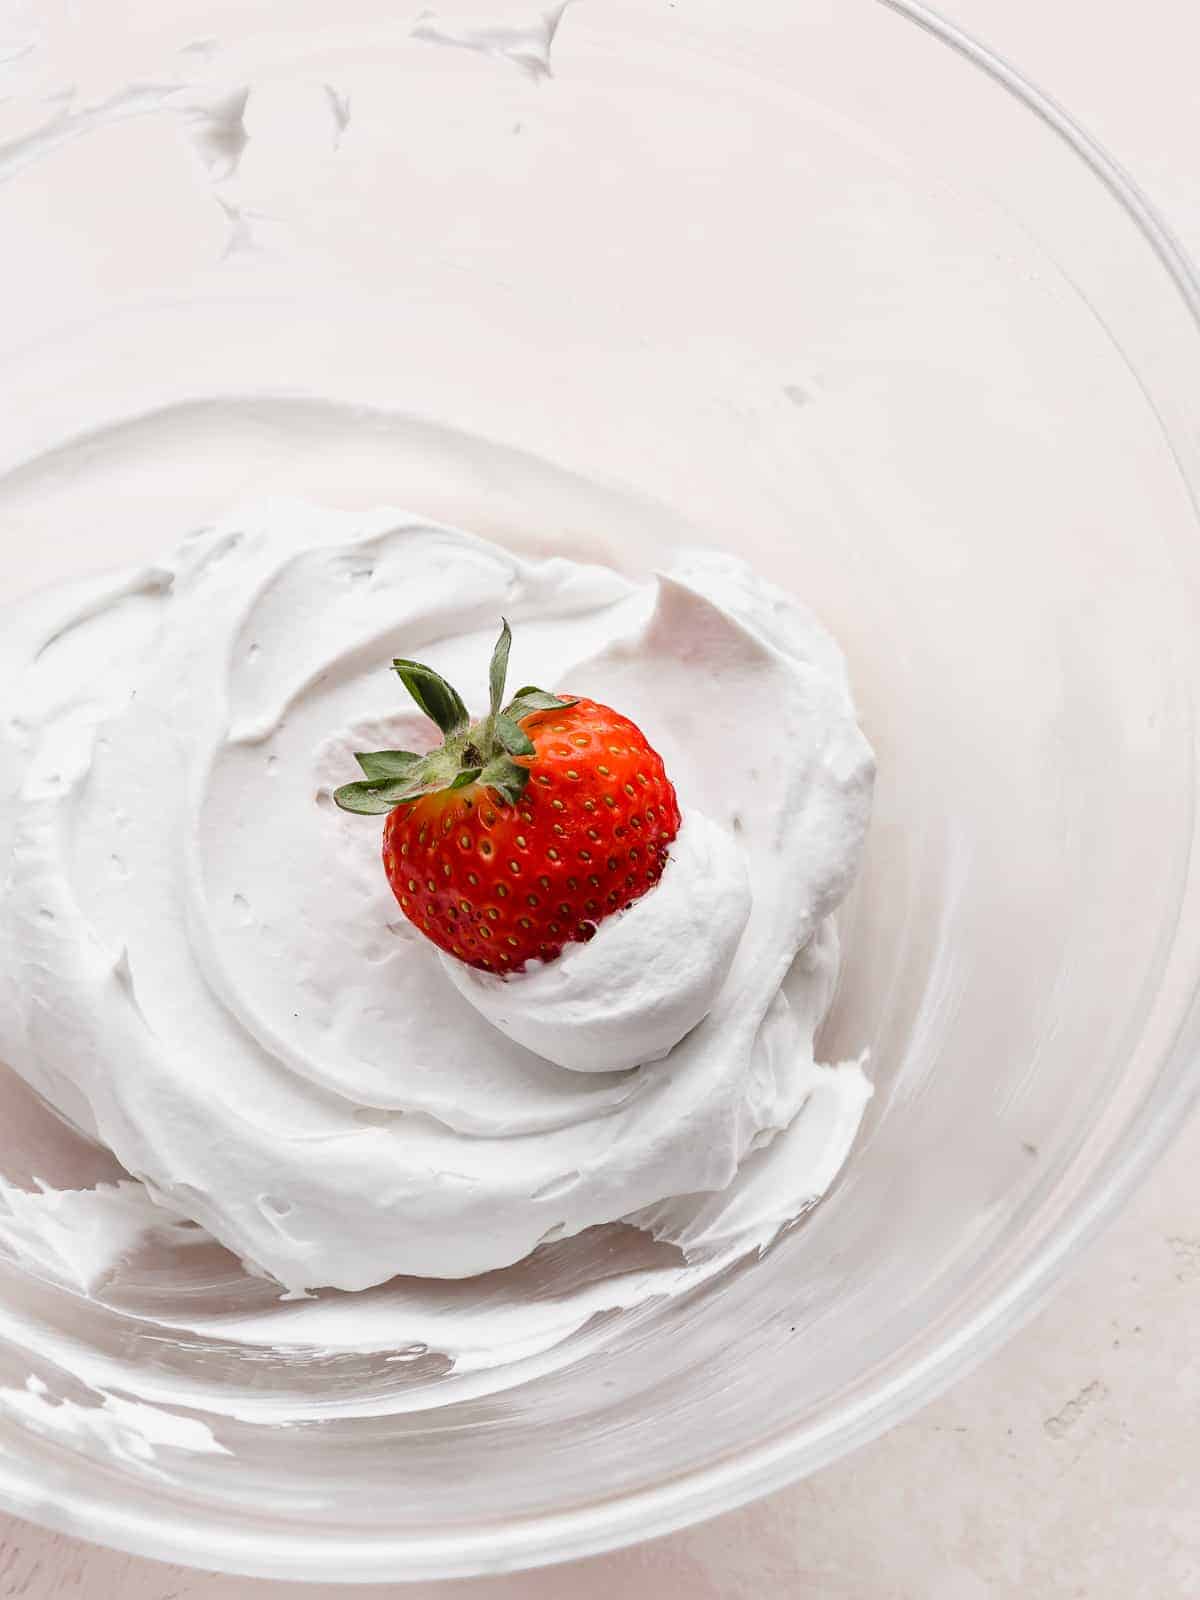 A red strawberry dipped into a pile of Coconut Whipped Cream.